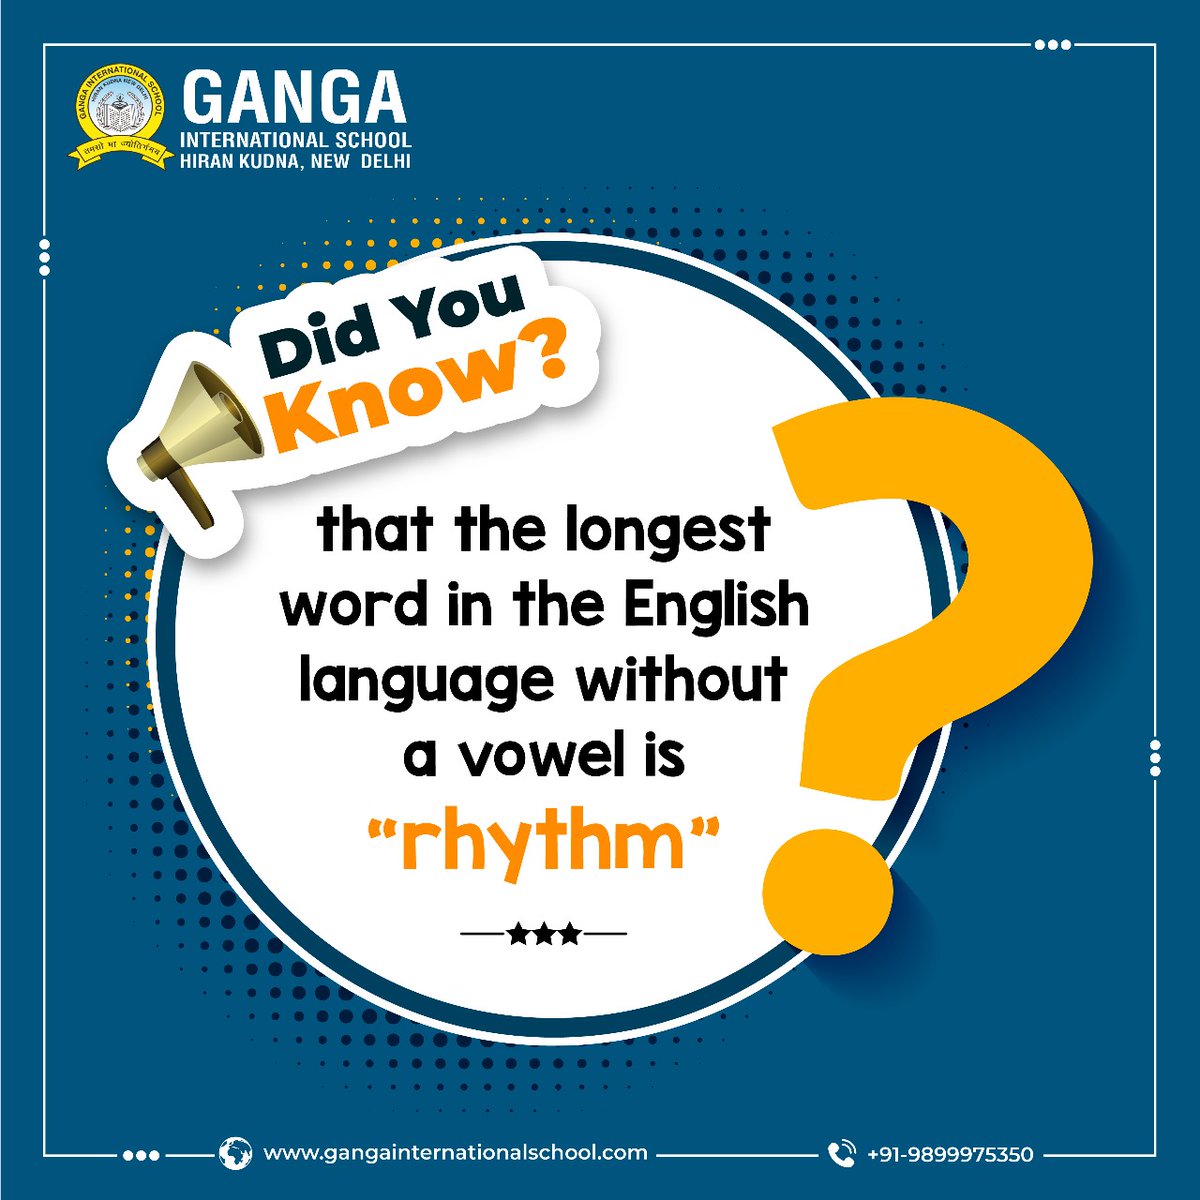 Who knew language could be so fascinating? Drop a 💬 if this fact surprised you!
.
.
.
#FunFacts #DidYouKnow #LanguageTrivia #didyouknew #didyouknowthat #vowel #englishgrammer #GIS #GISstudents #topfaculty #bestteachers #bestschool #rhythm #fact #funfactsoftheday